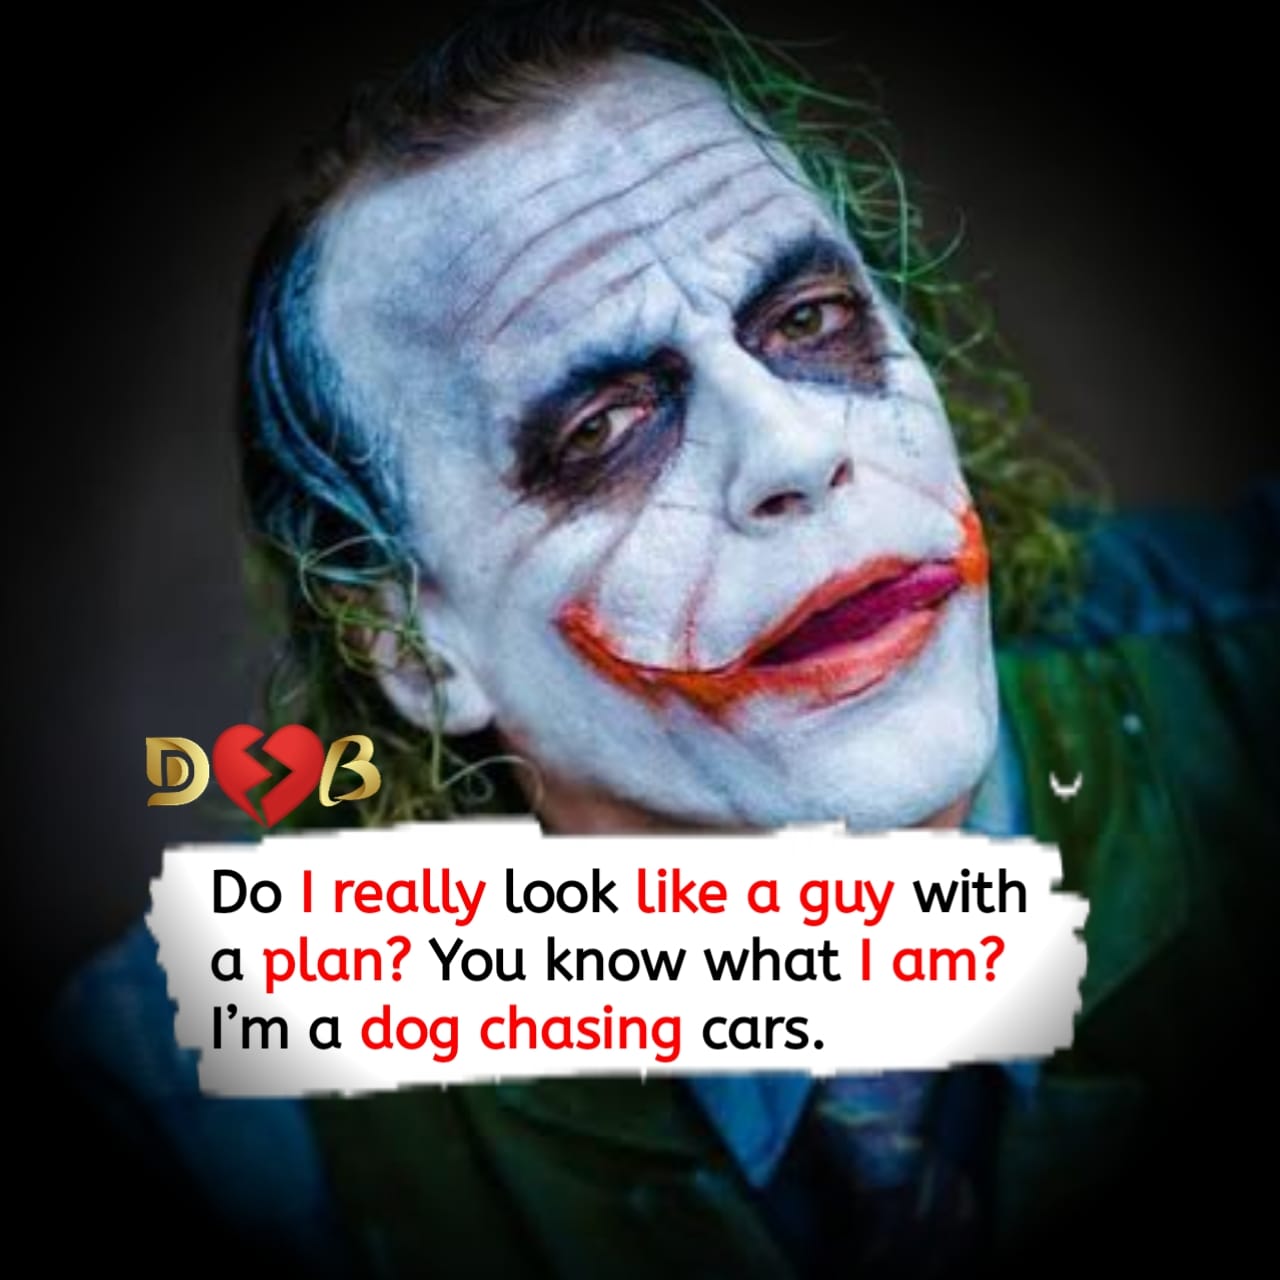 Joker quotes about pain